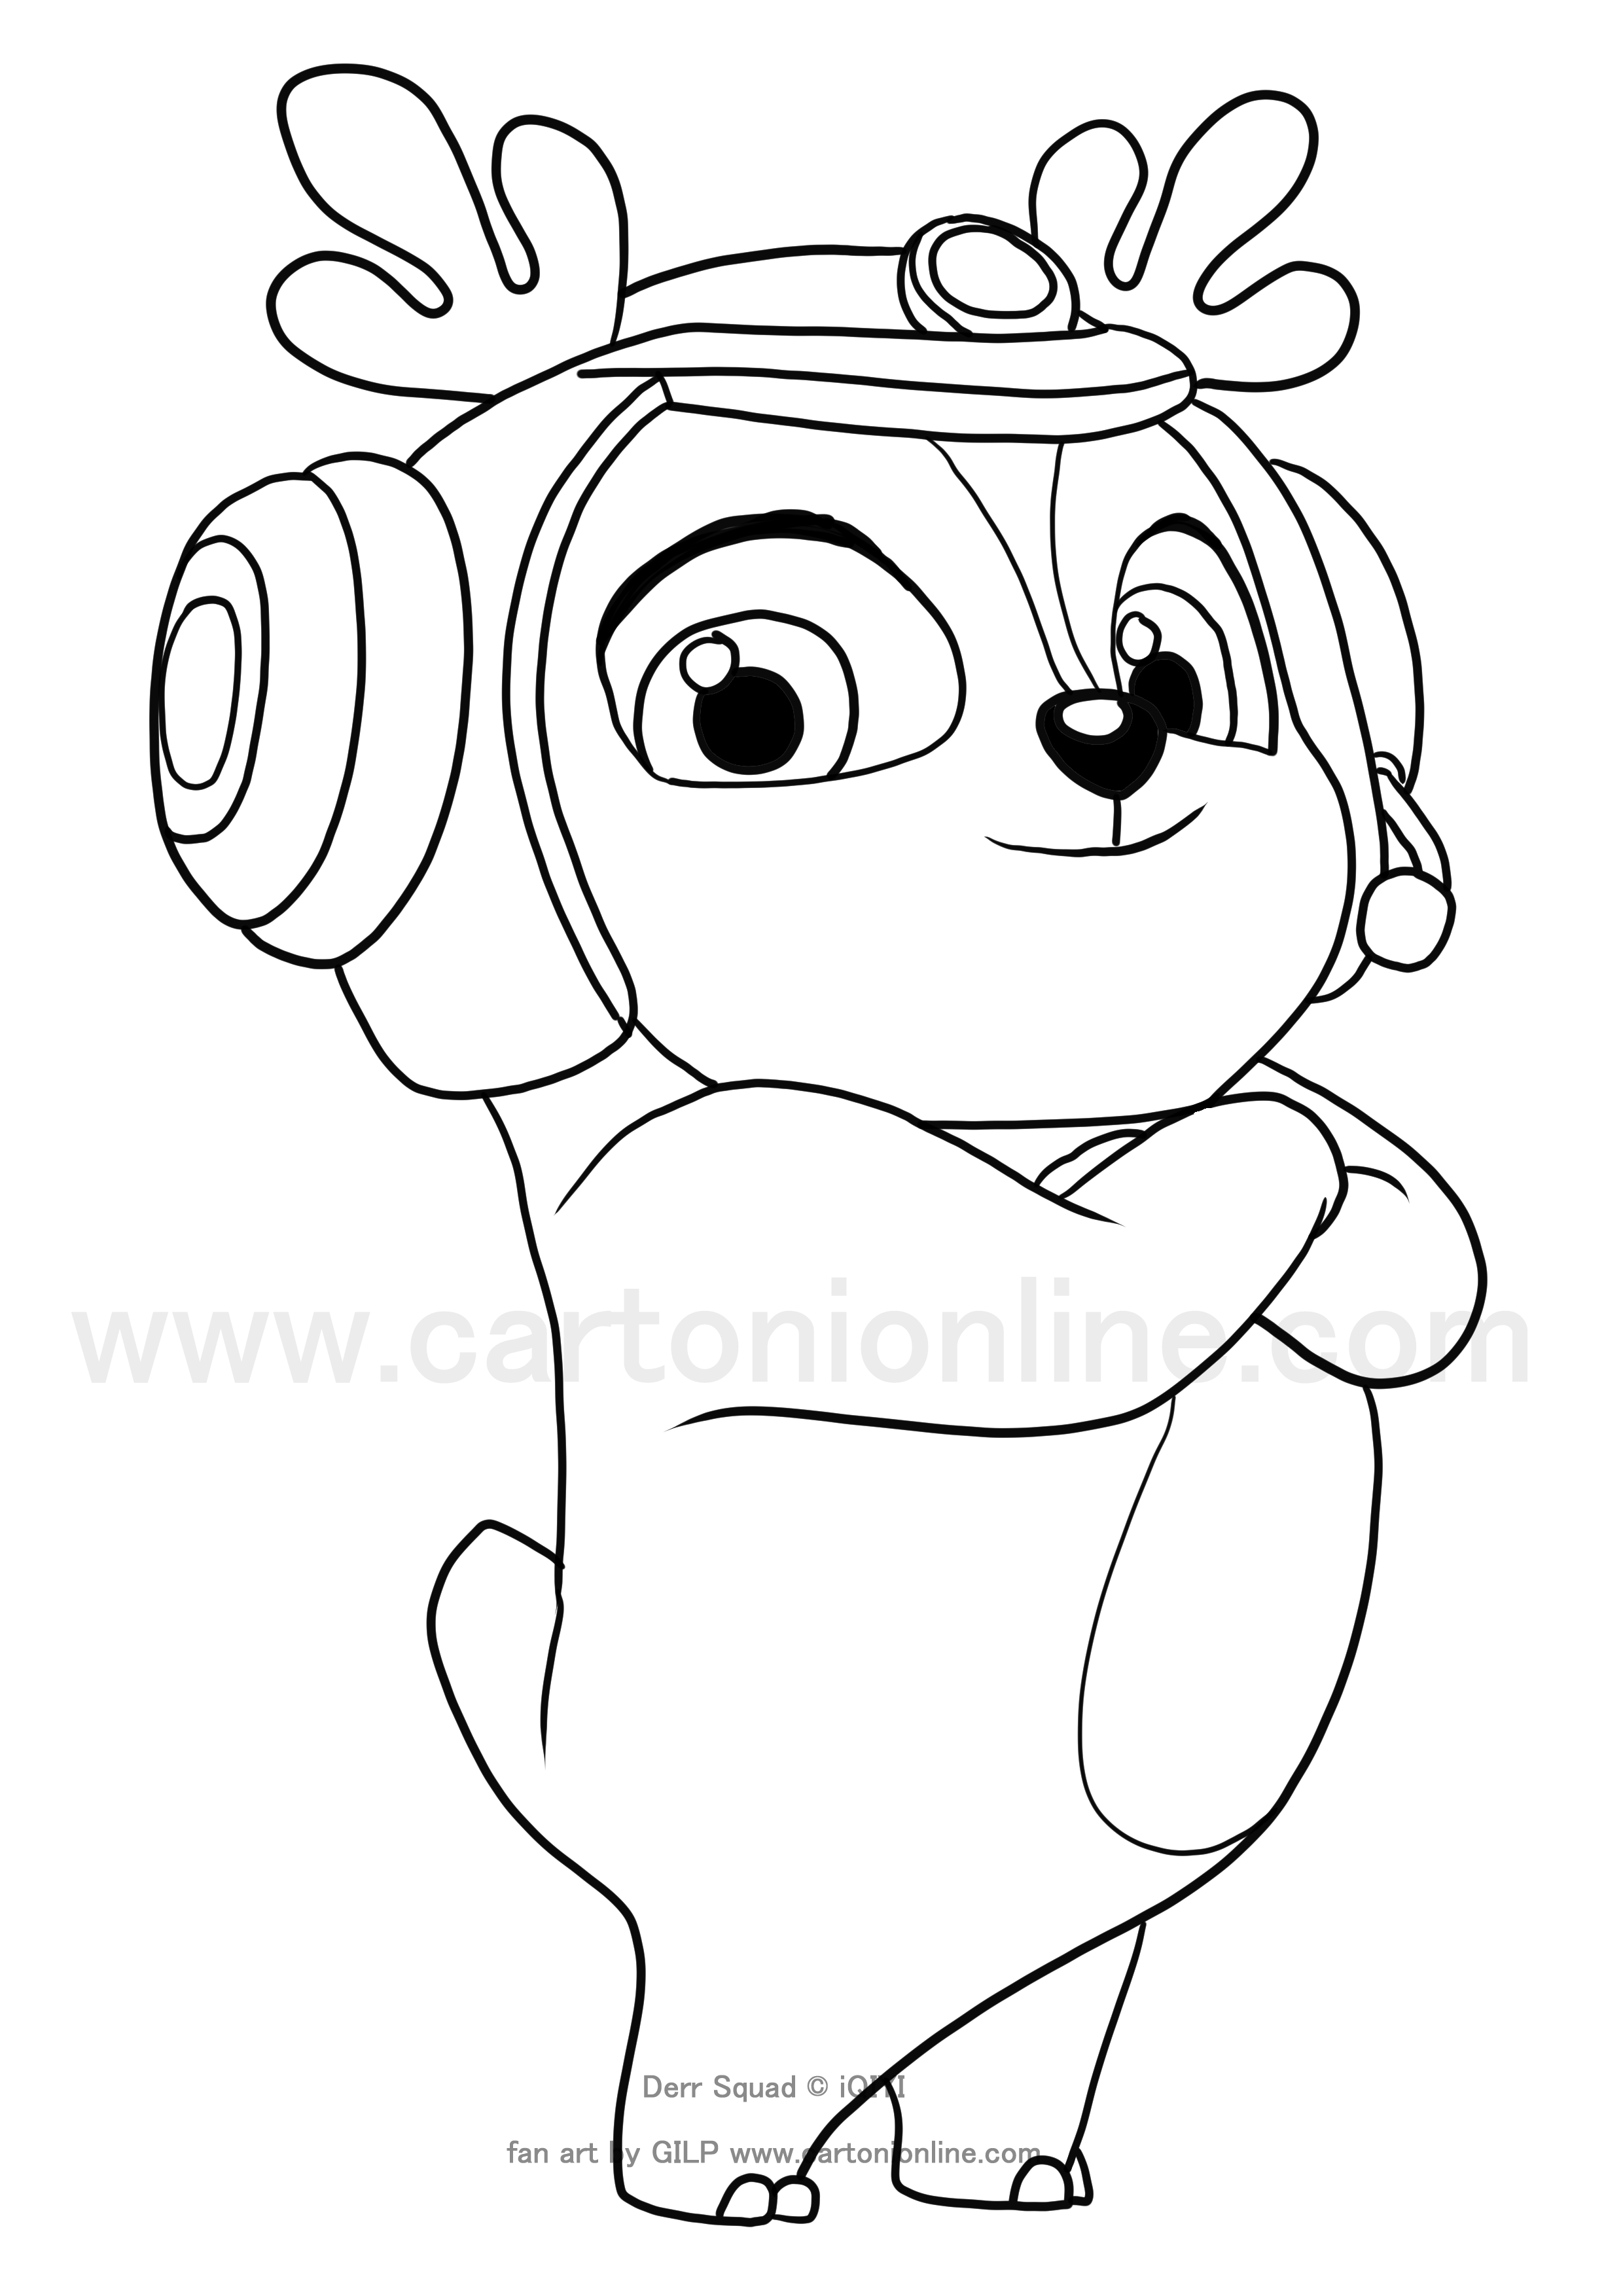 Lola from Deer Squad coloring pages to print and coloring